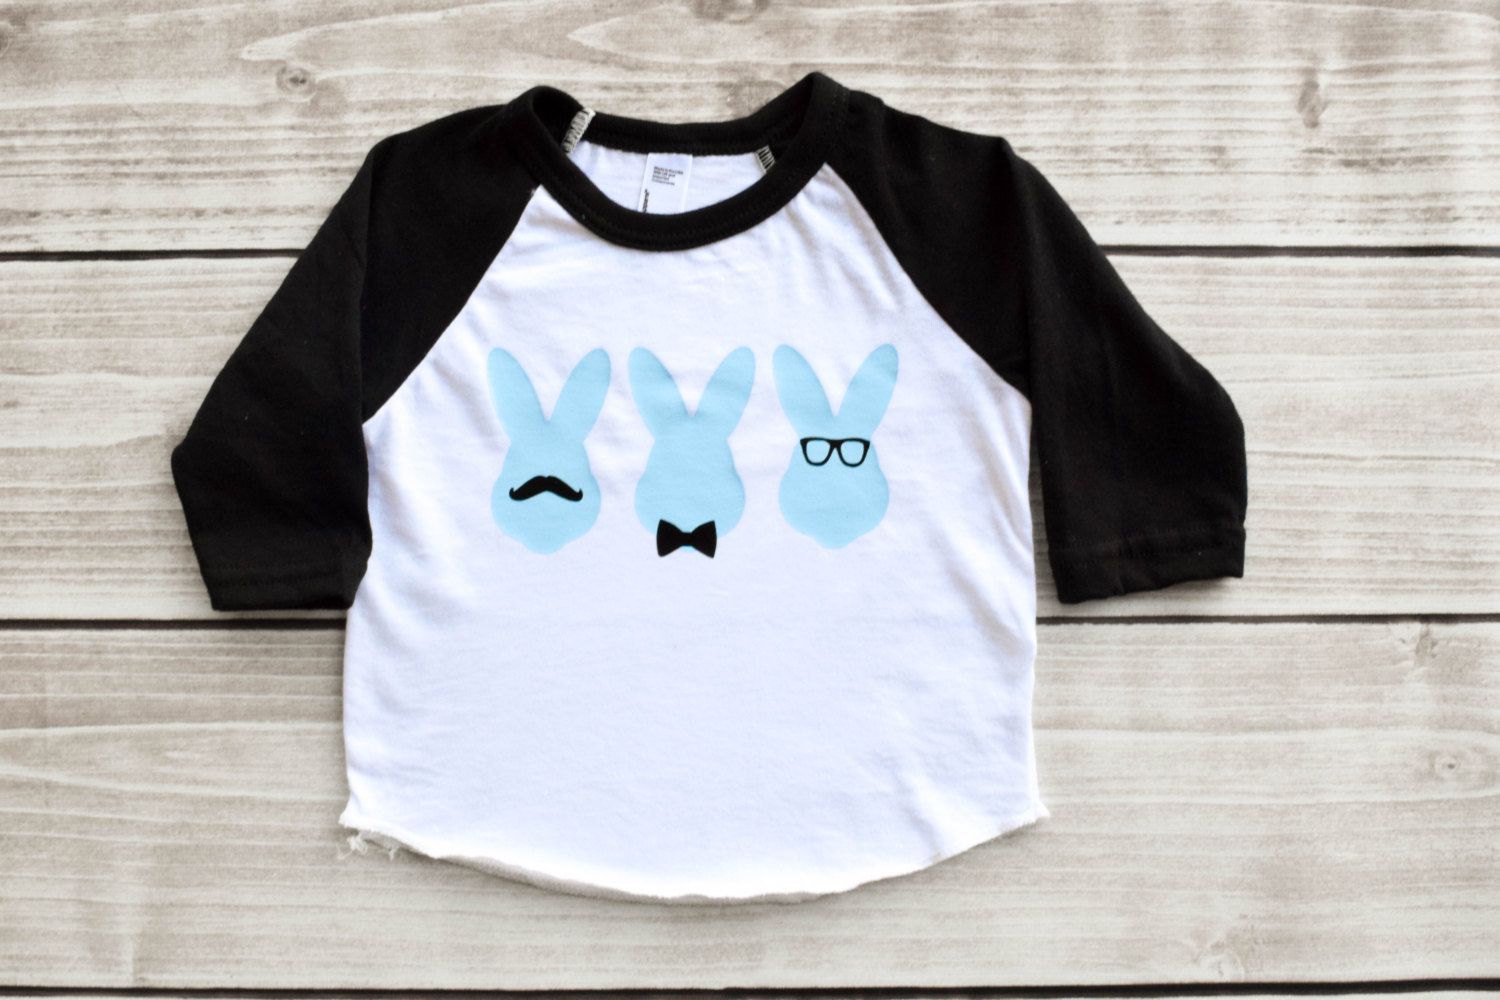 Easter basket ideas: Hipster bunny tee shirt from Our 5 Loves